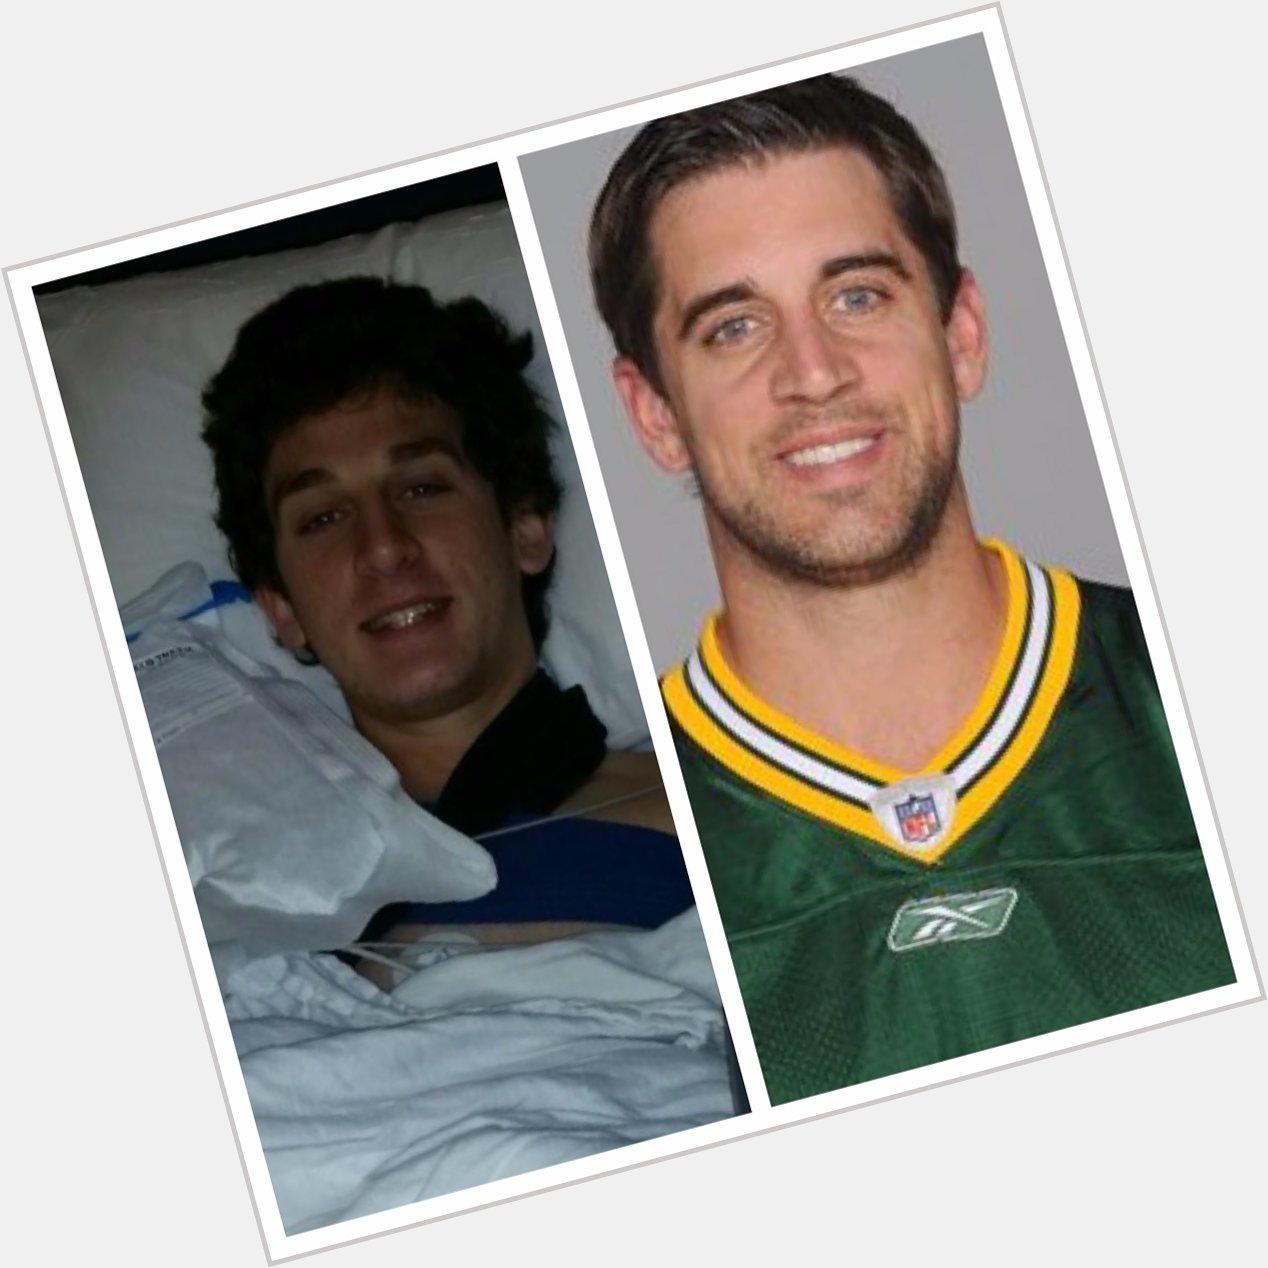  happy bday to my boy who looks like Aaron Rodgers  